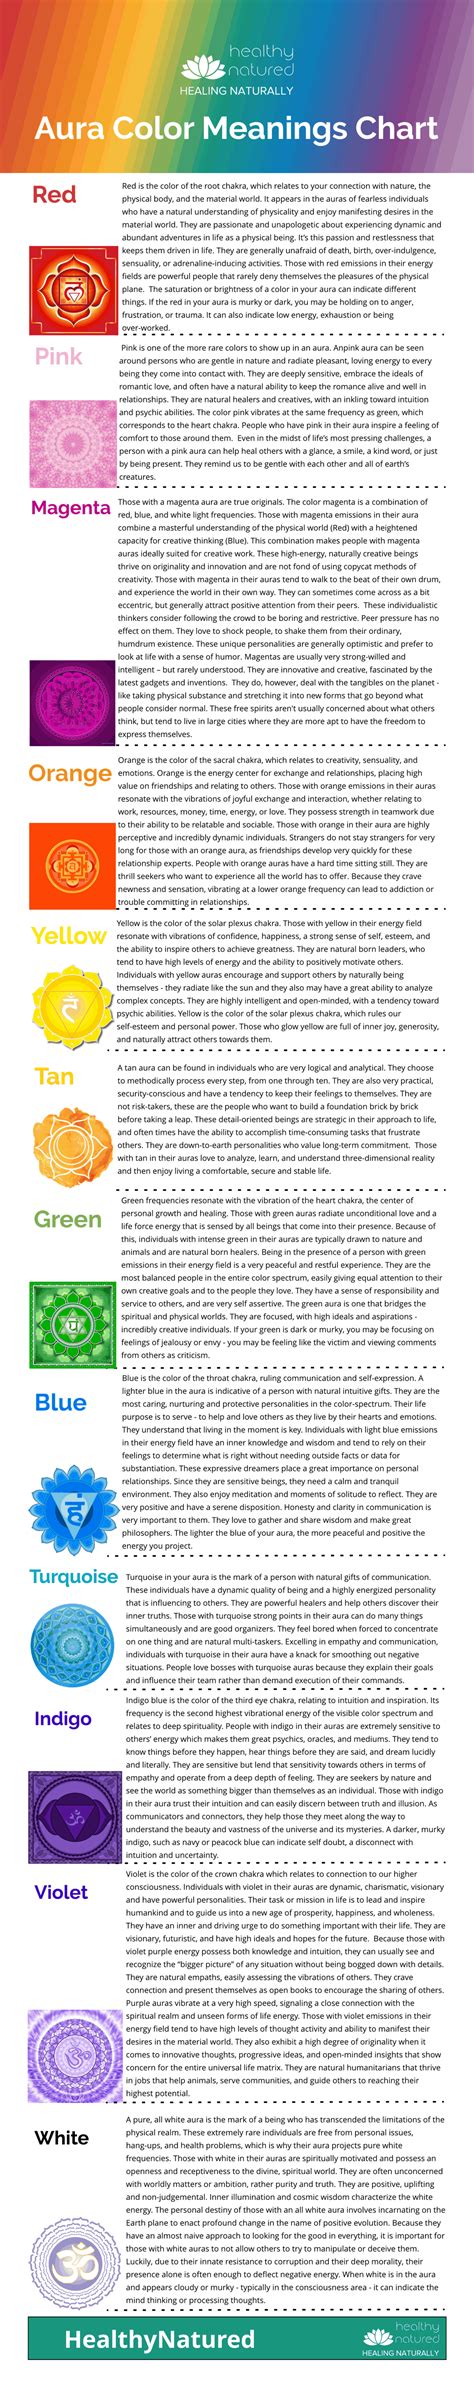 Chakras And Their Meanings Aura Color Meaning Guide Goddess Aura Images